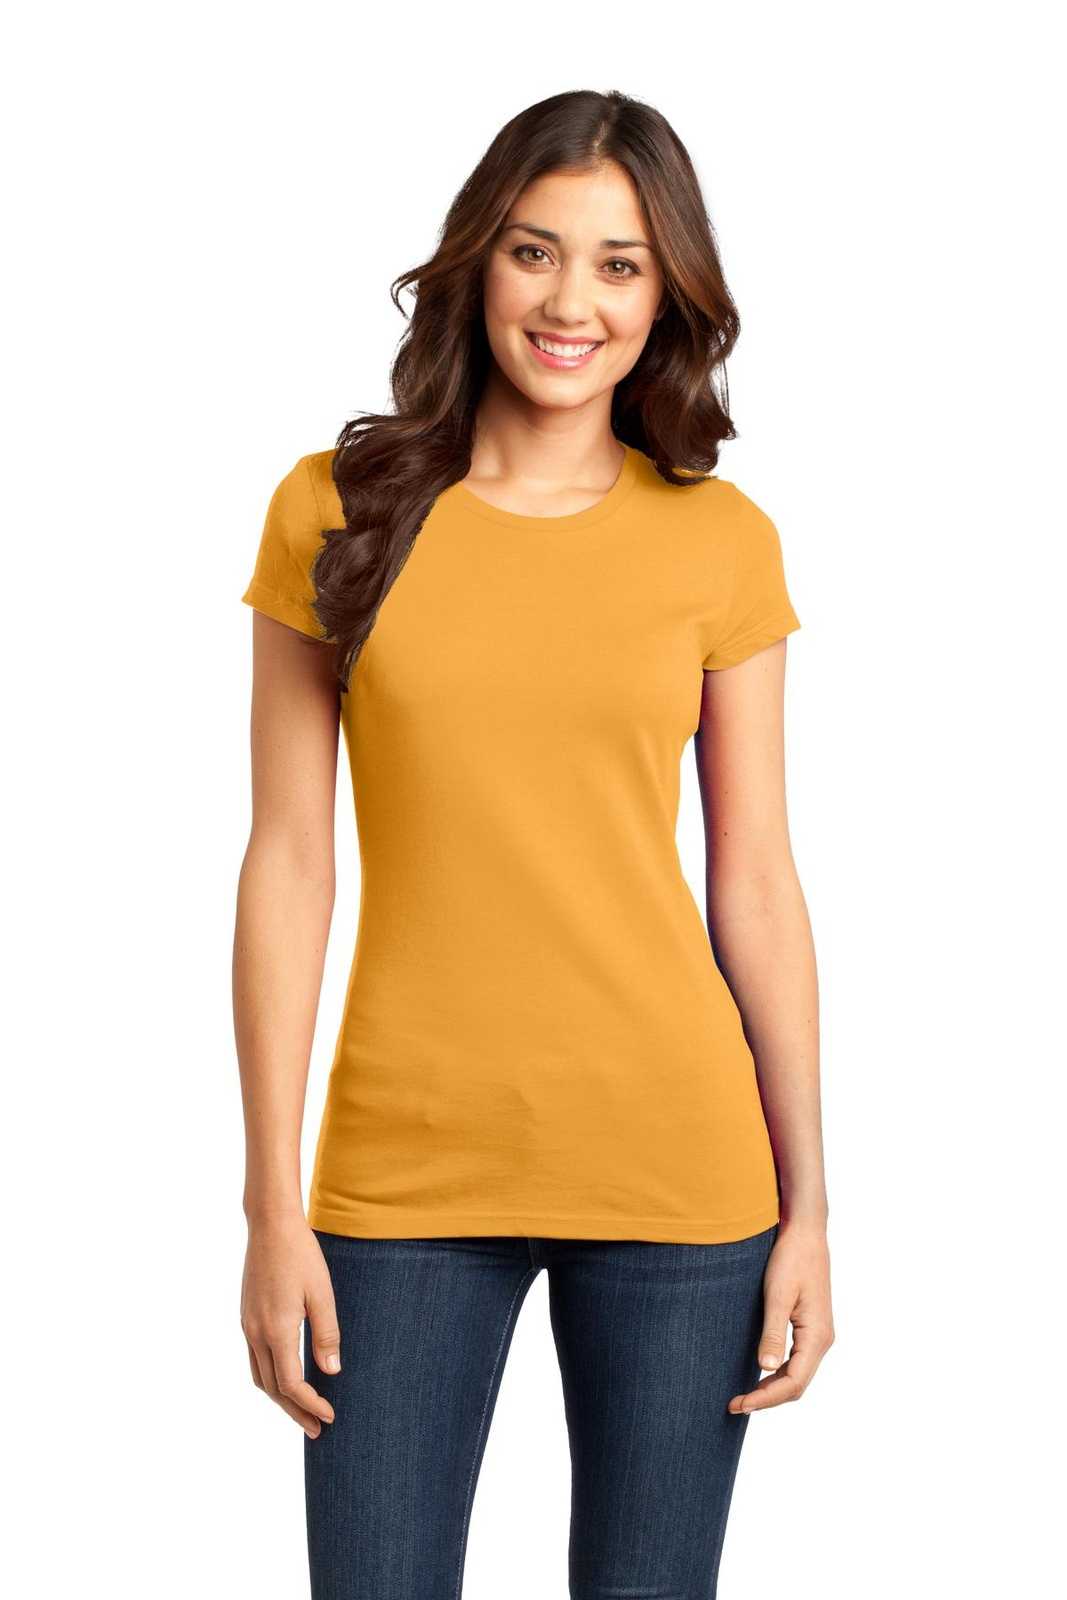 District DT6001 Women's Fitted Very Important Tee - Gold - HIT a Double - 1